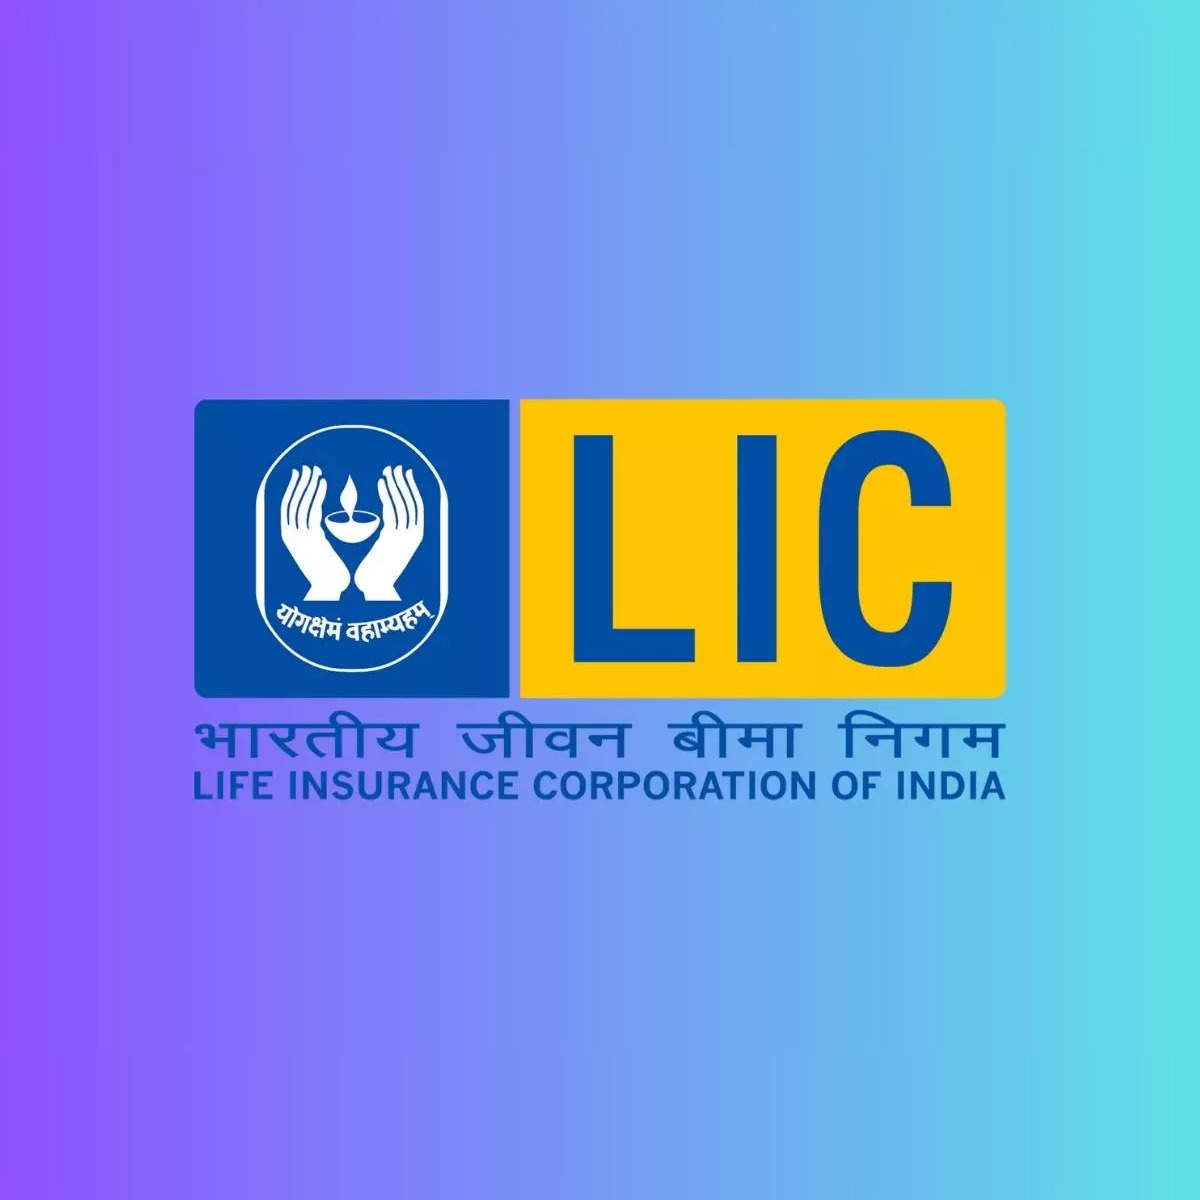 The worth of LIC's Adani group holdings jumps by 51.6% to reach Rs 66,000 crore